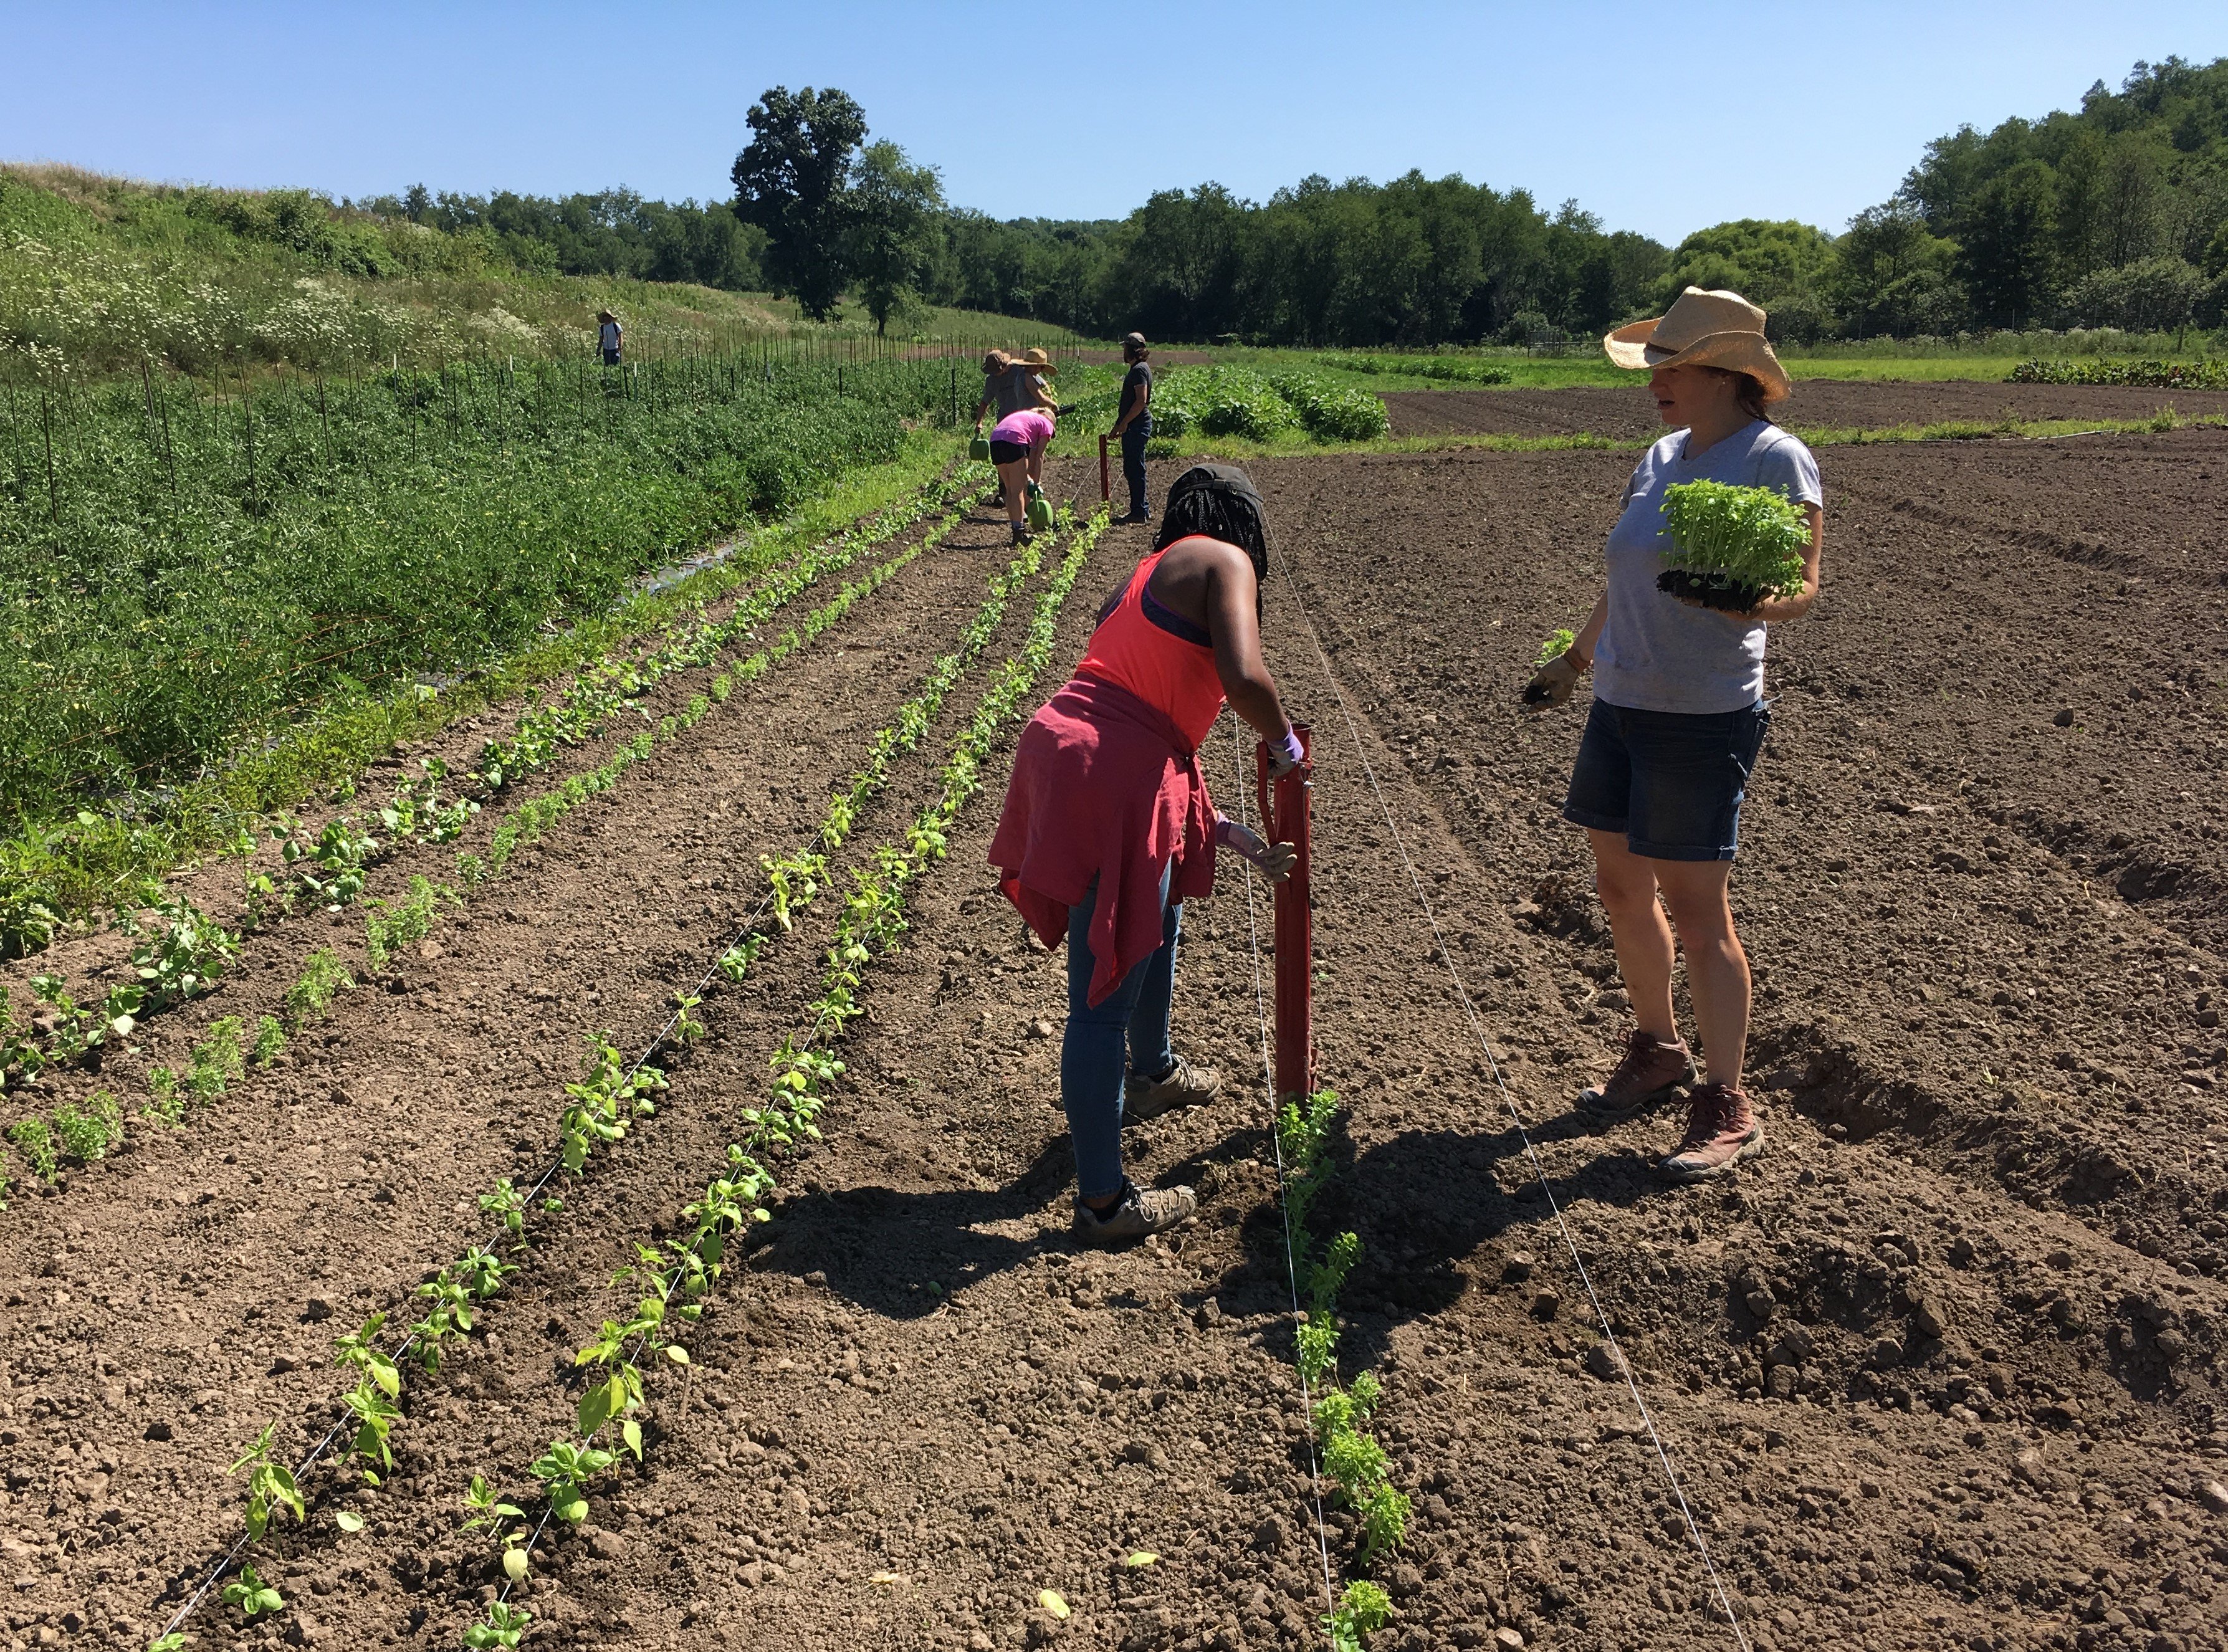 Previous Happening: Rivendale Farms CSA Newsletter, Week 7 (July 24)